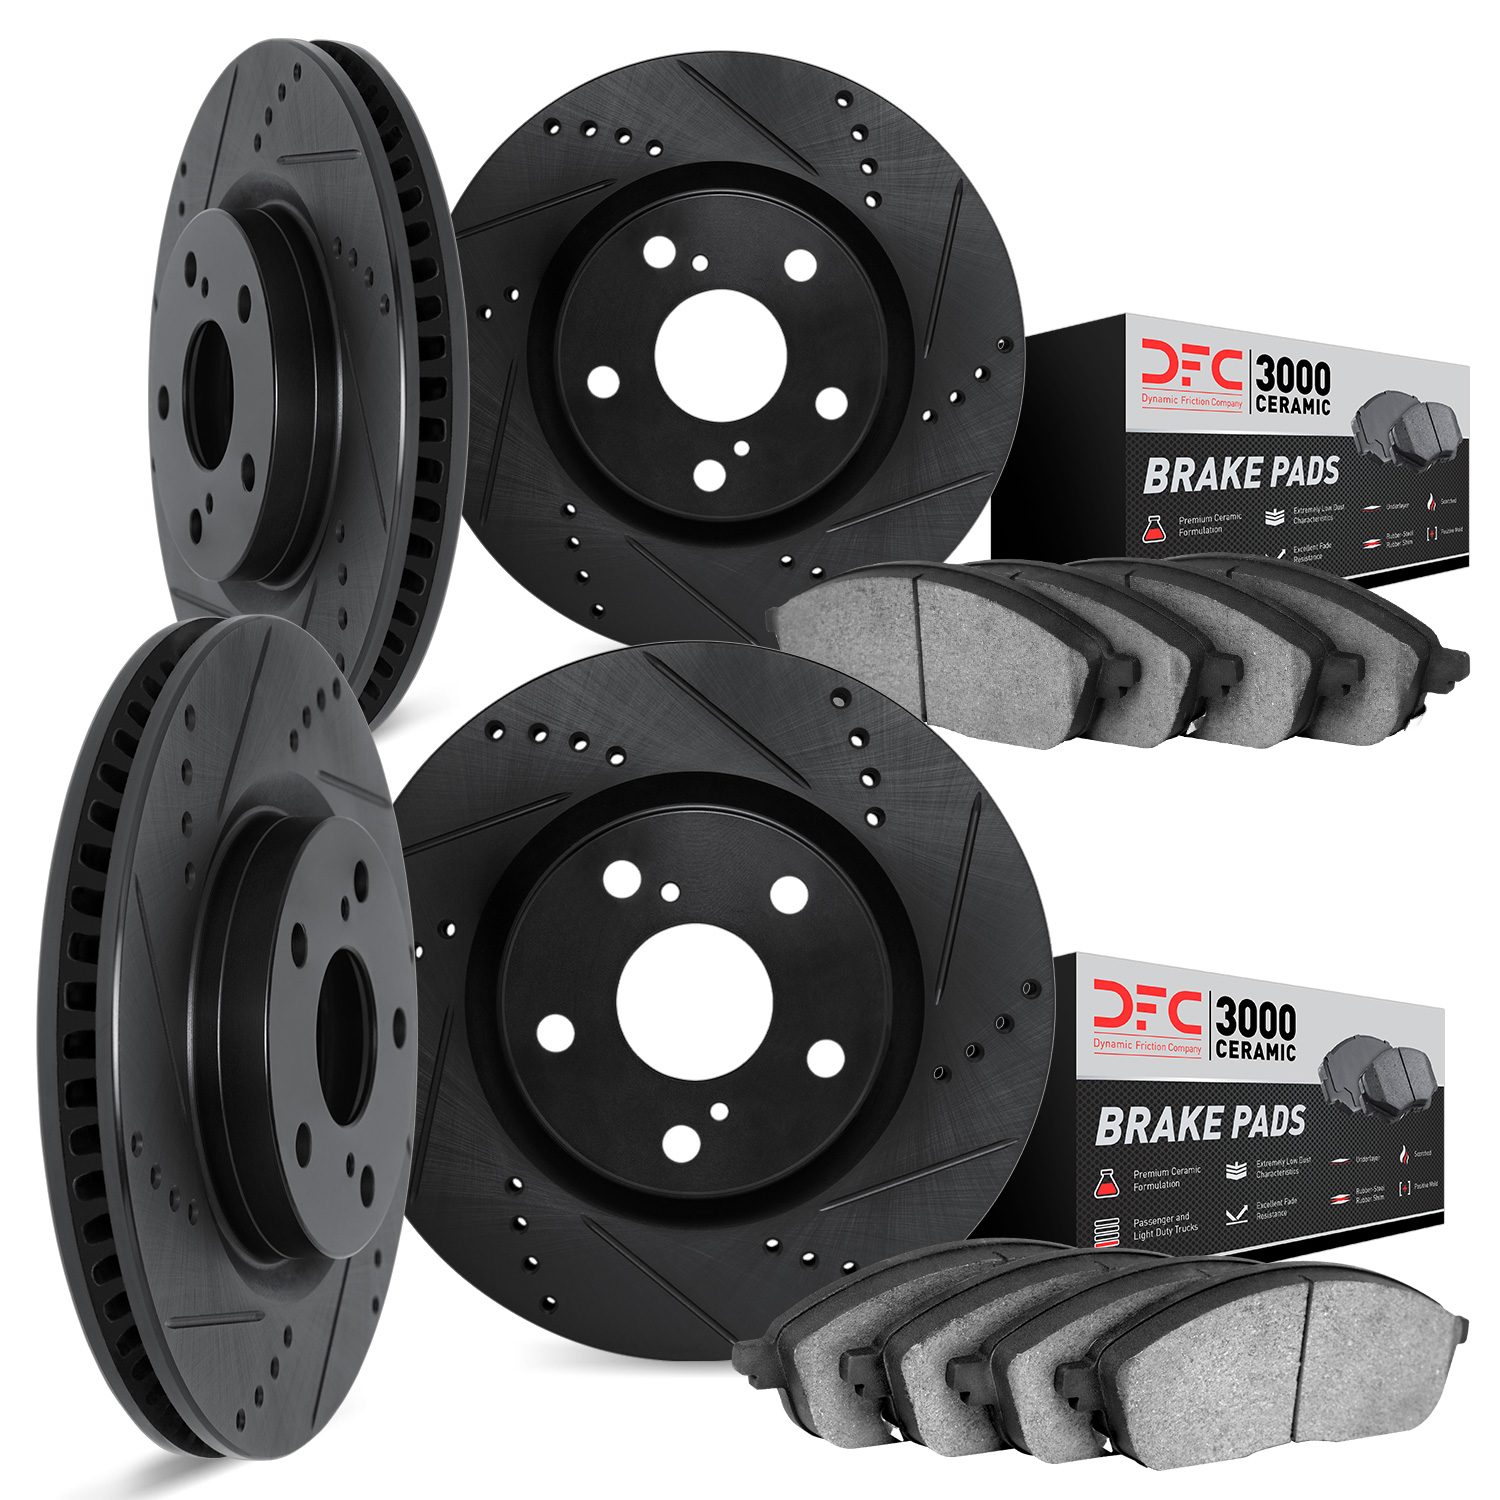 8304-48003 Drilled/Slotted Brake Rotors with 3000-Series Ceramic Brake Pads Kit [Black], 1998-2005 GM, Position: Front and Rear